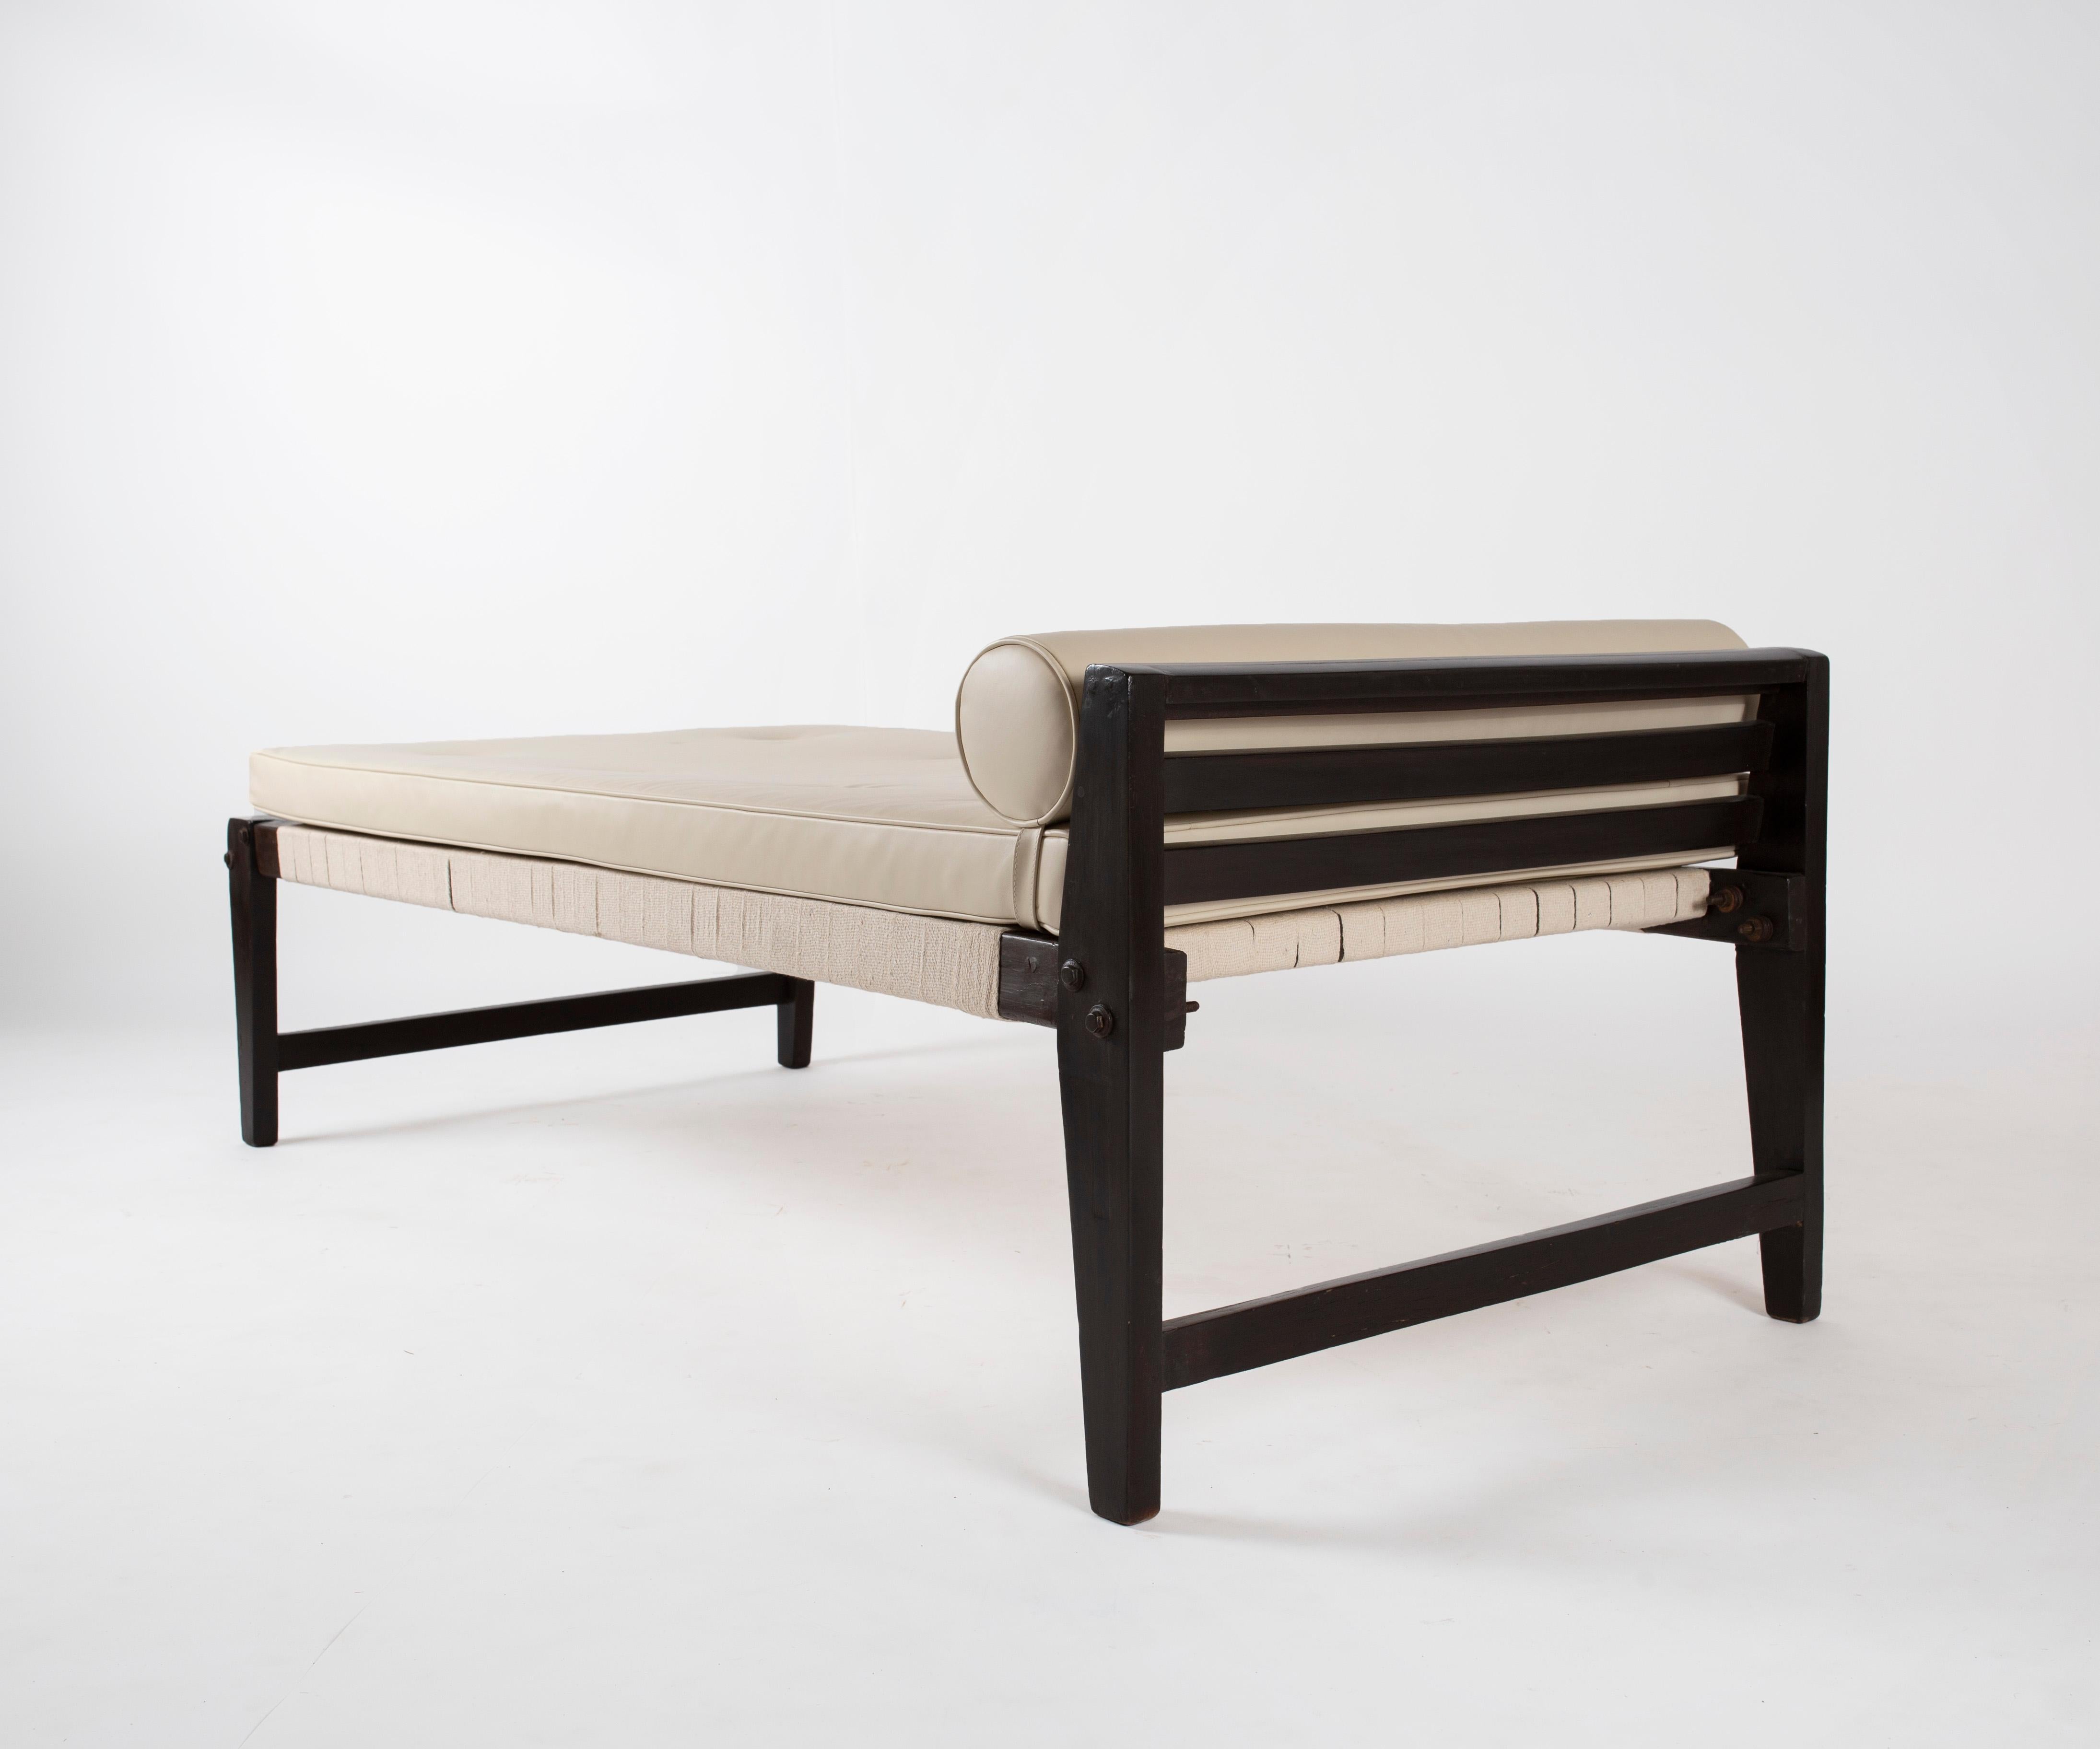 Indian Pierre Jeanneret De-Mountable Daybed with Headrest, Circa 1956 For Sale